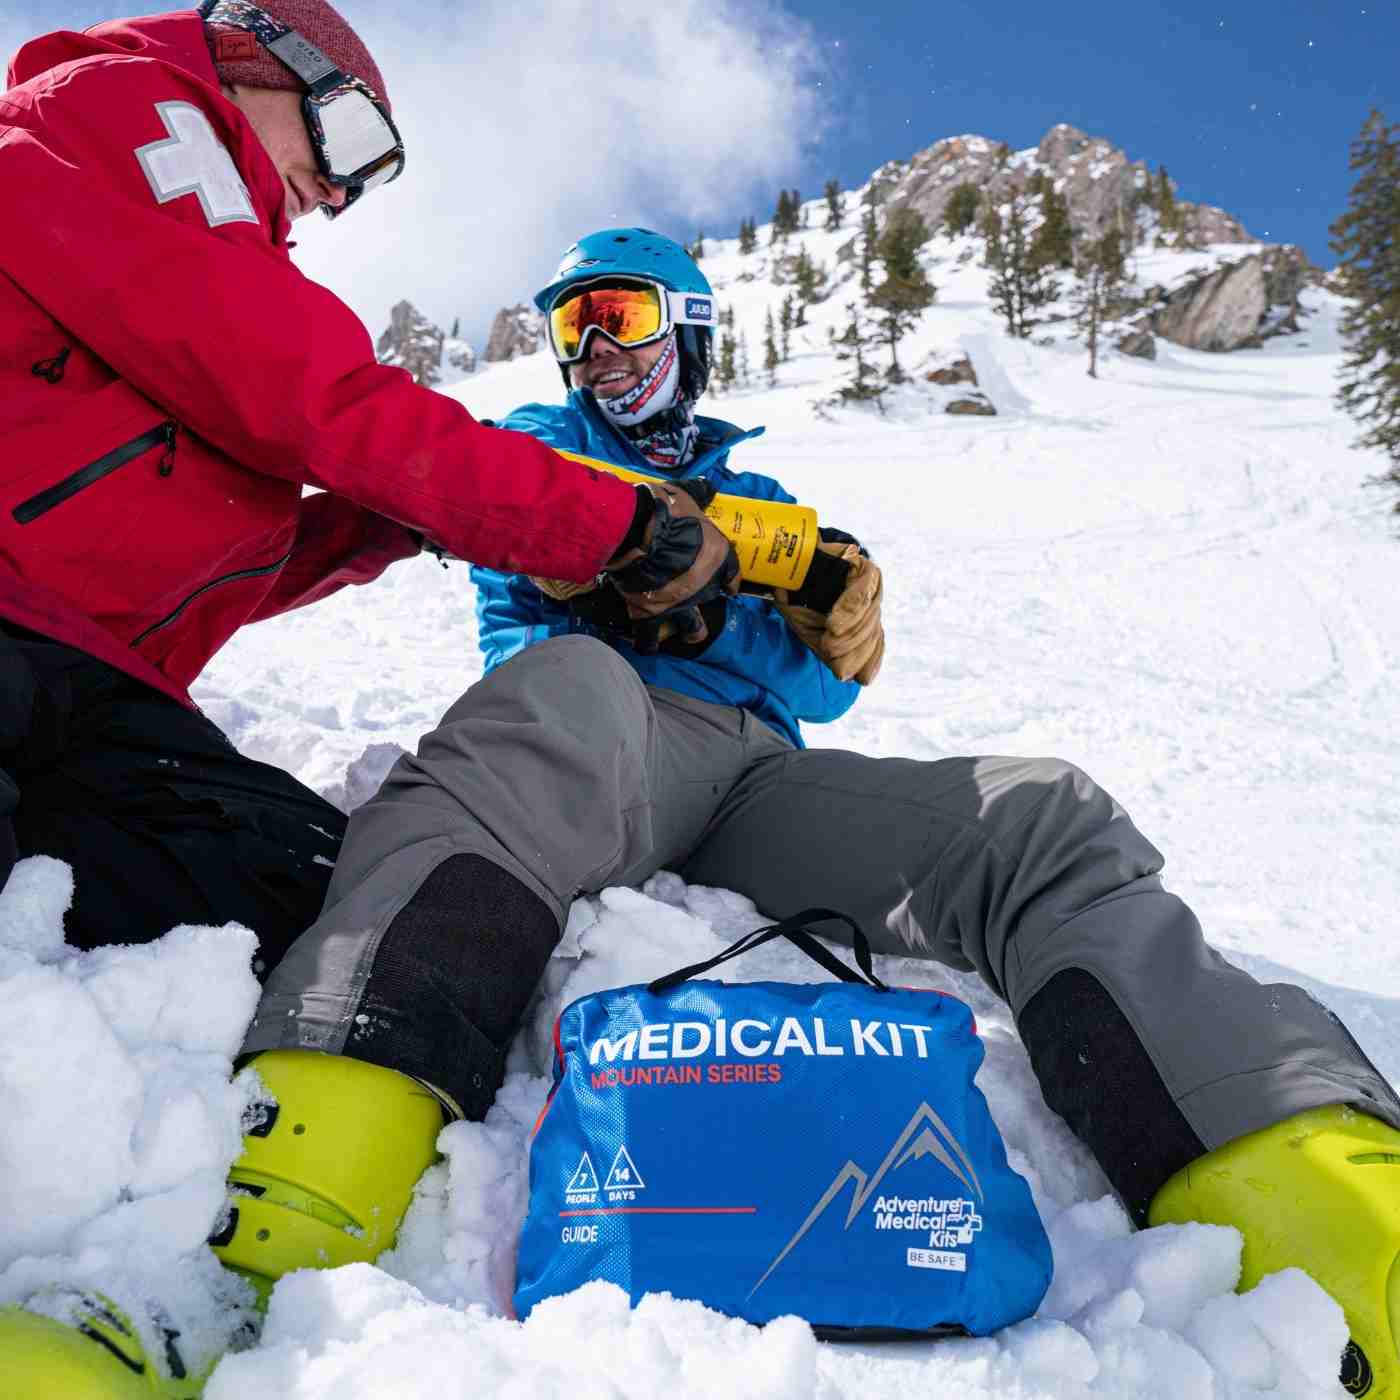 Mountain Series Medical Kit - Guide Ski Patrol tending to broken arm with kit in front on snow